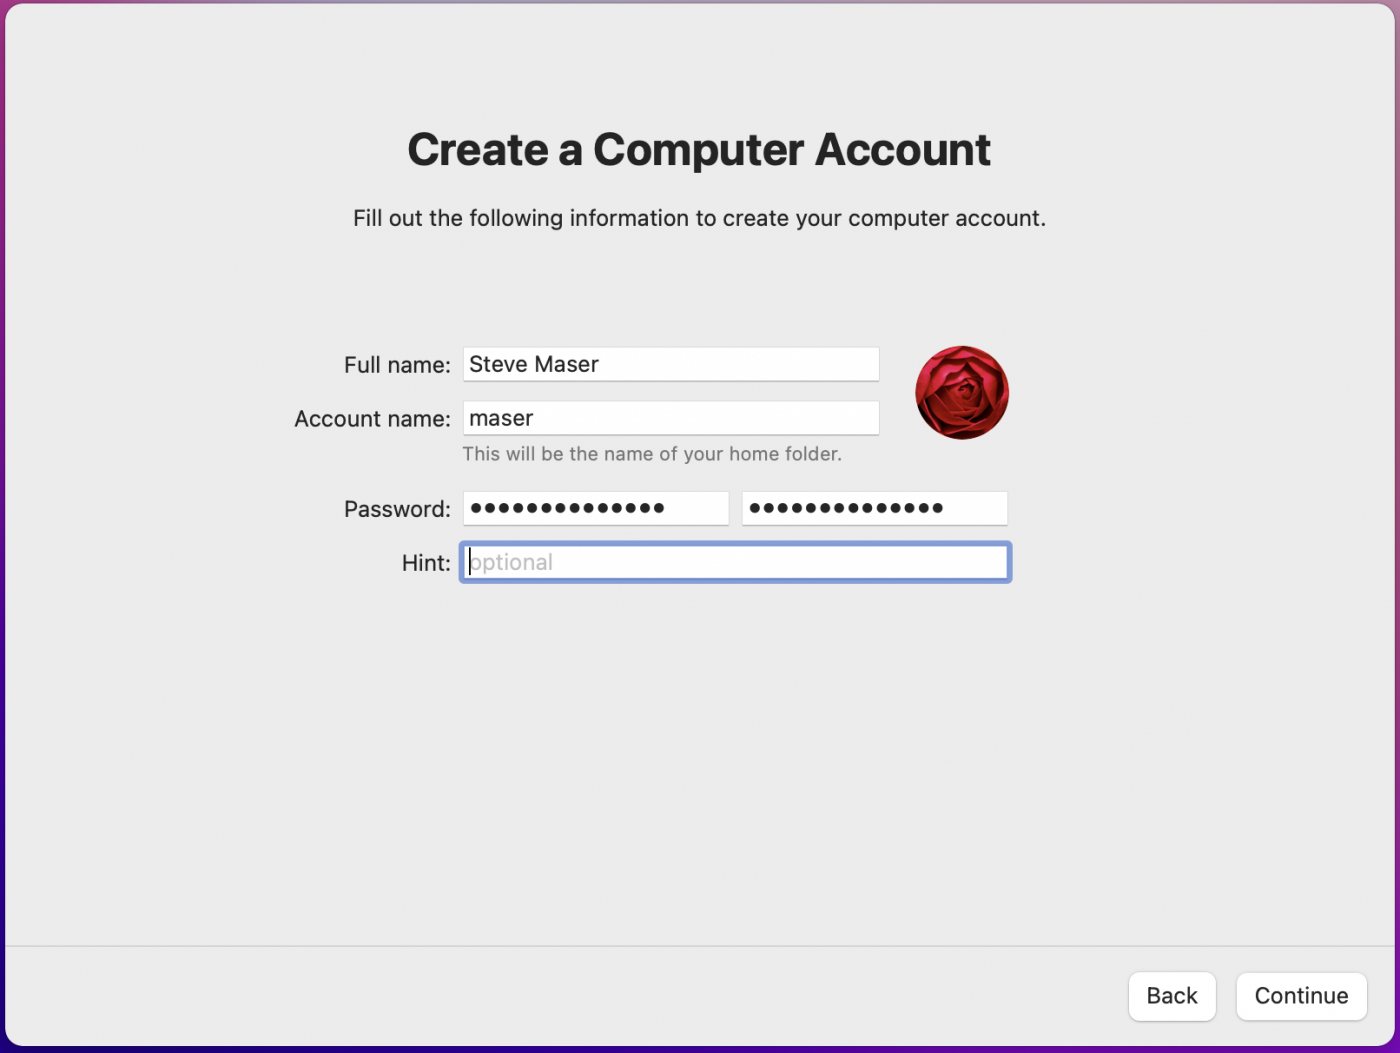 create computer account screen prefilled with user information